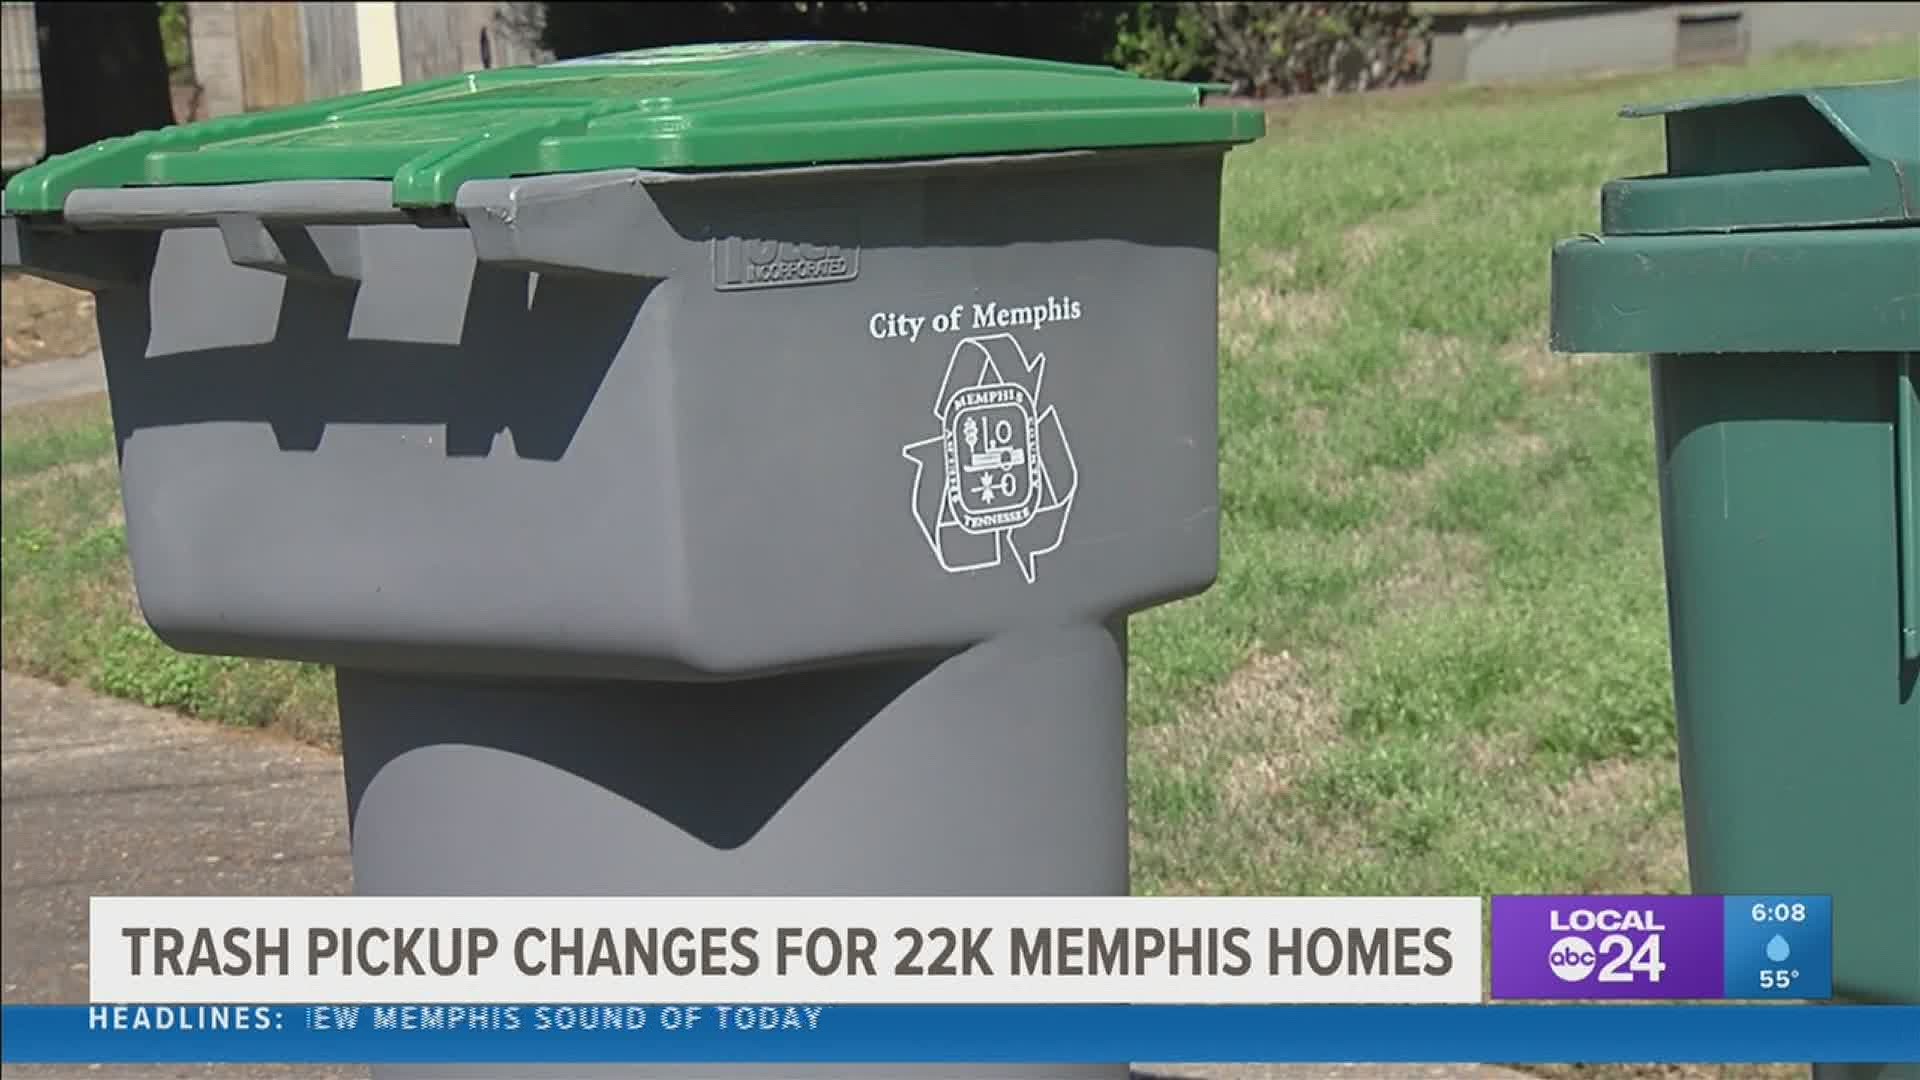 The City of Memphis says solid waste pickup schedules are changing for 22,000 households beginning the week of March 1, 2021.